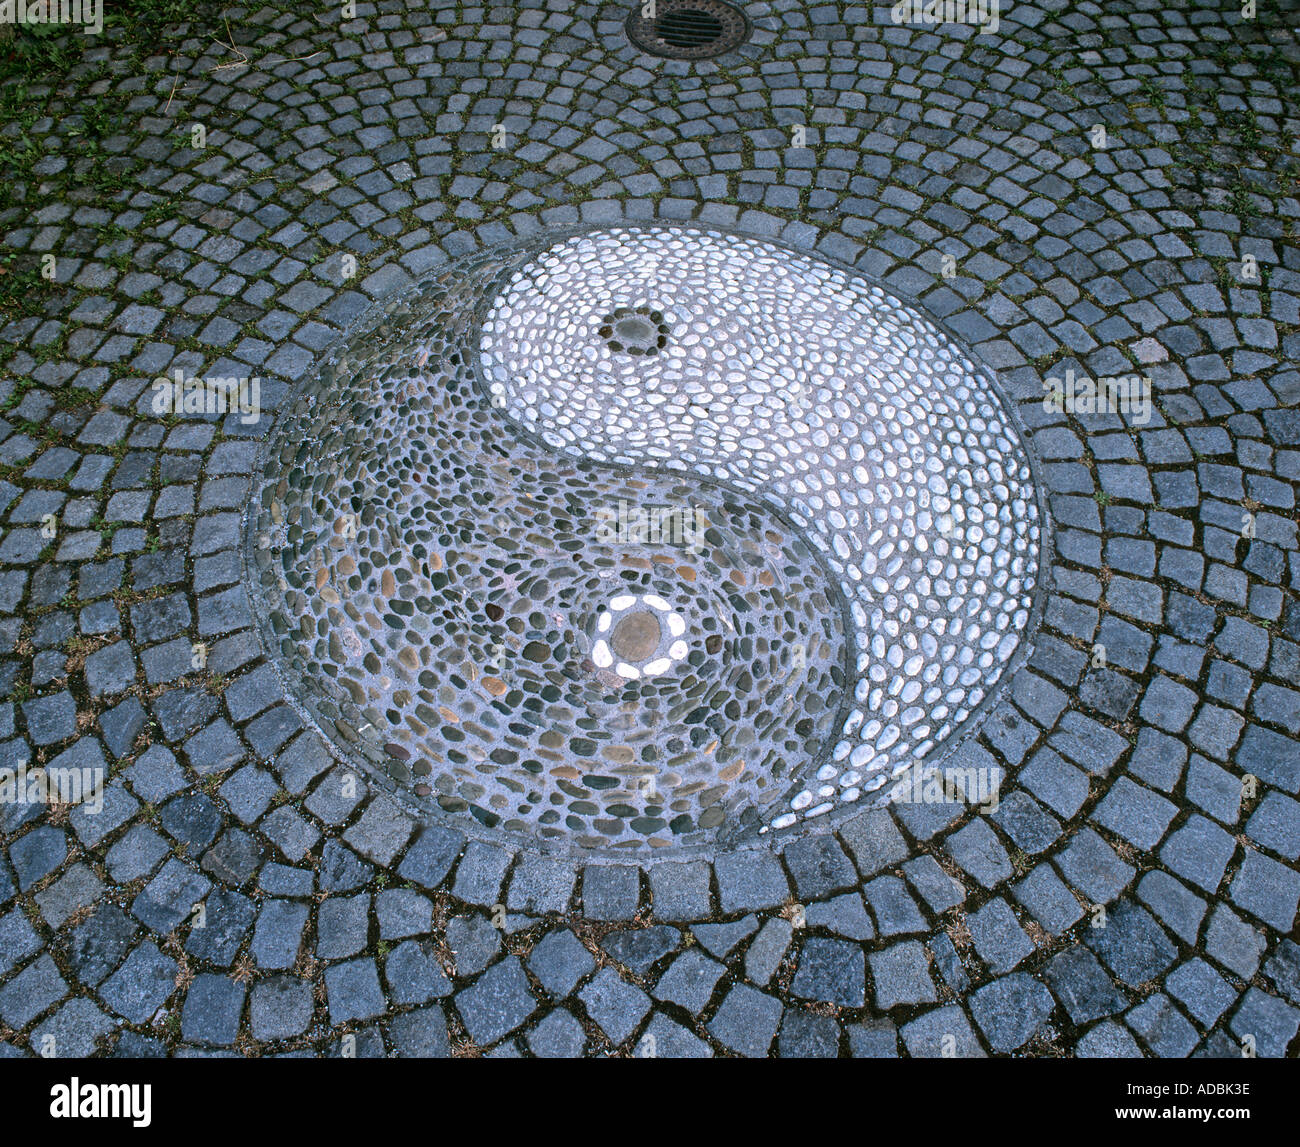 Yin yang symbol constructed of pebbles in the pavement at the entrance to the Chinese Garden, Stuttgart, Germany. Stock Photo